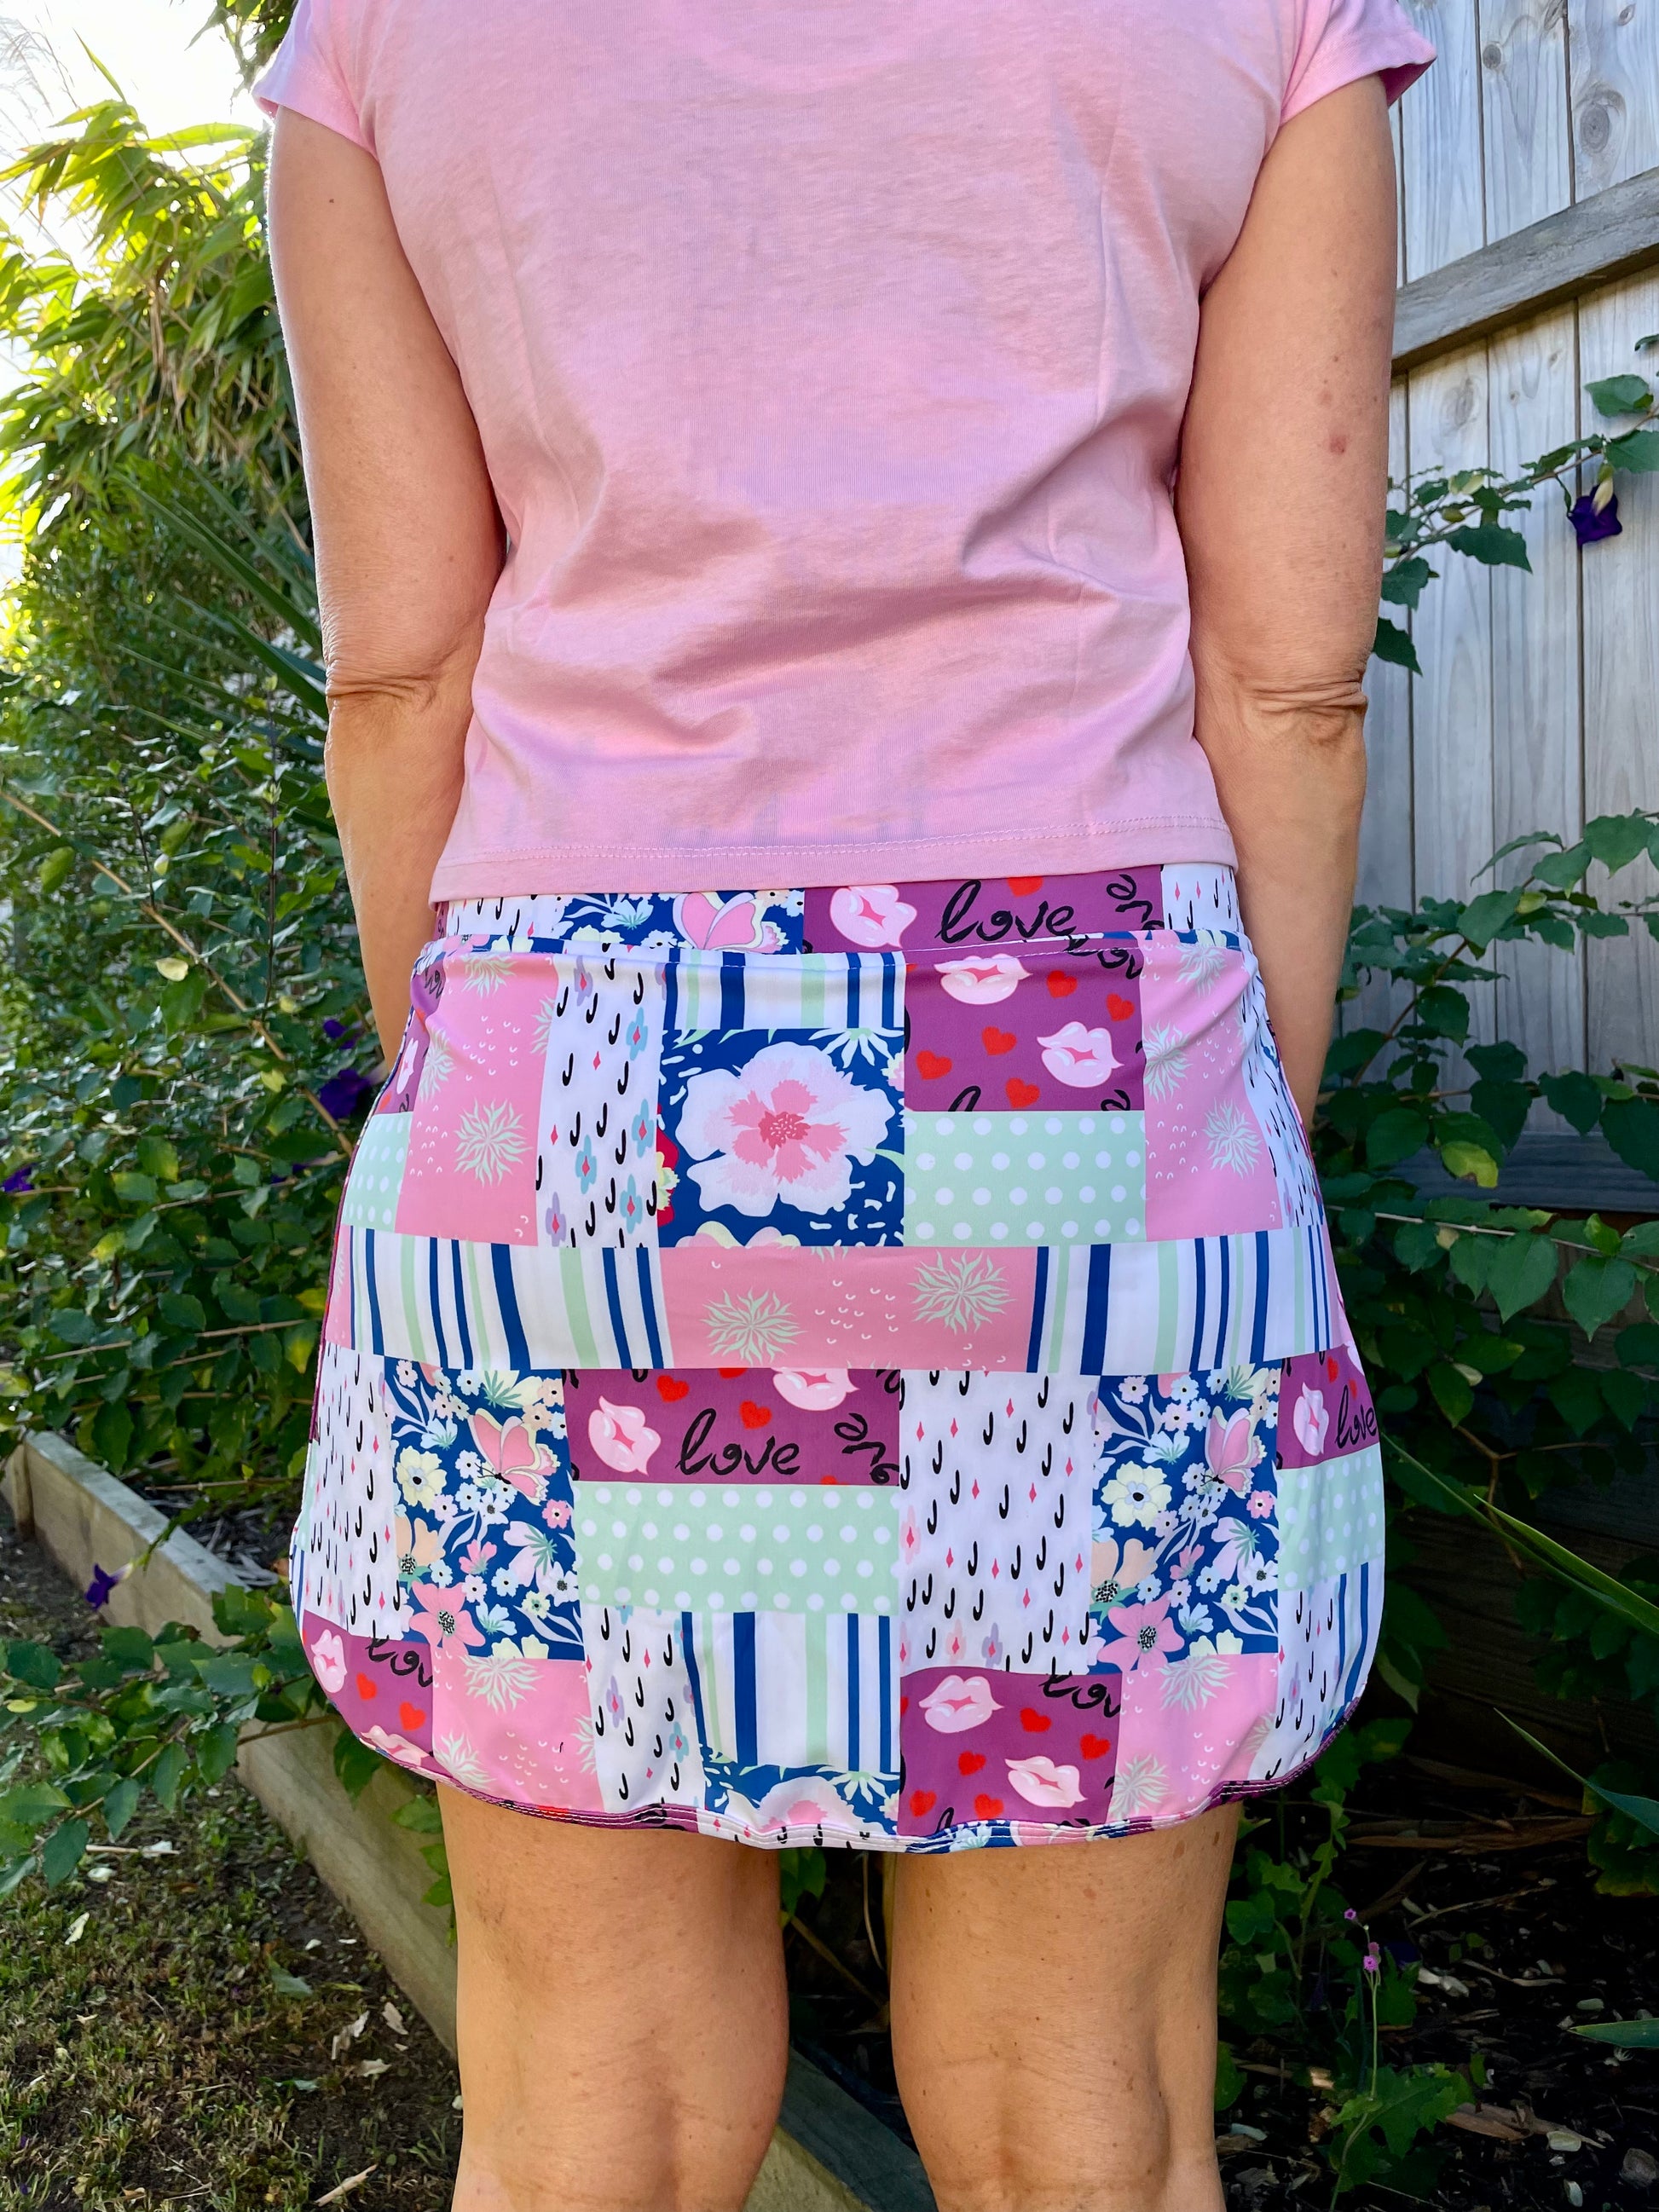 Gmaxx Patchwork Skort . Our most pop[ular print. Sewn in shorts with pockets, mid thigh